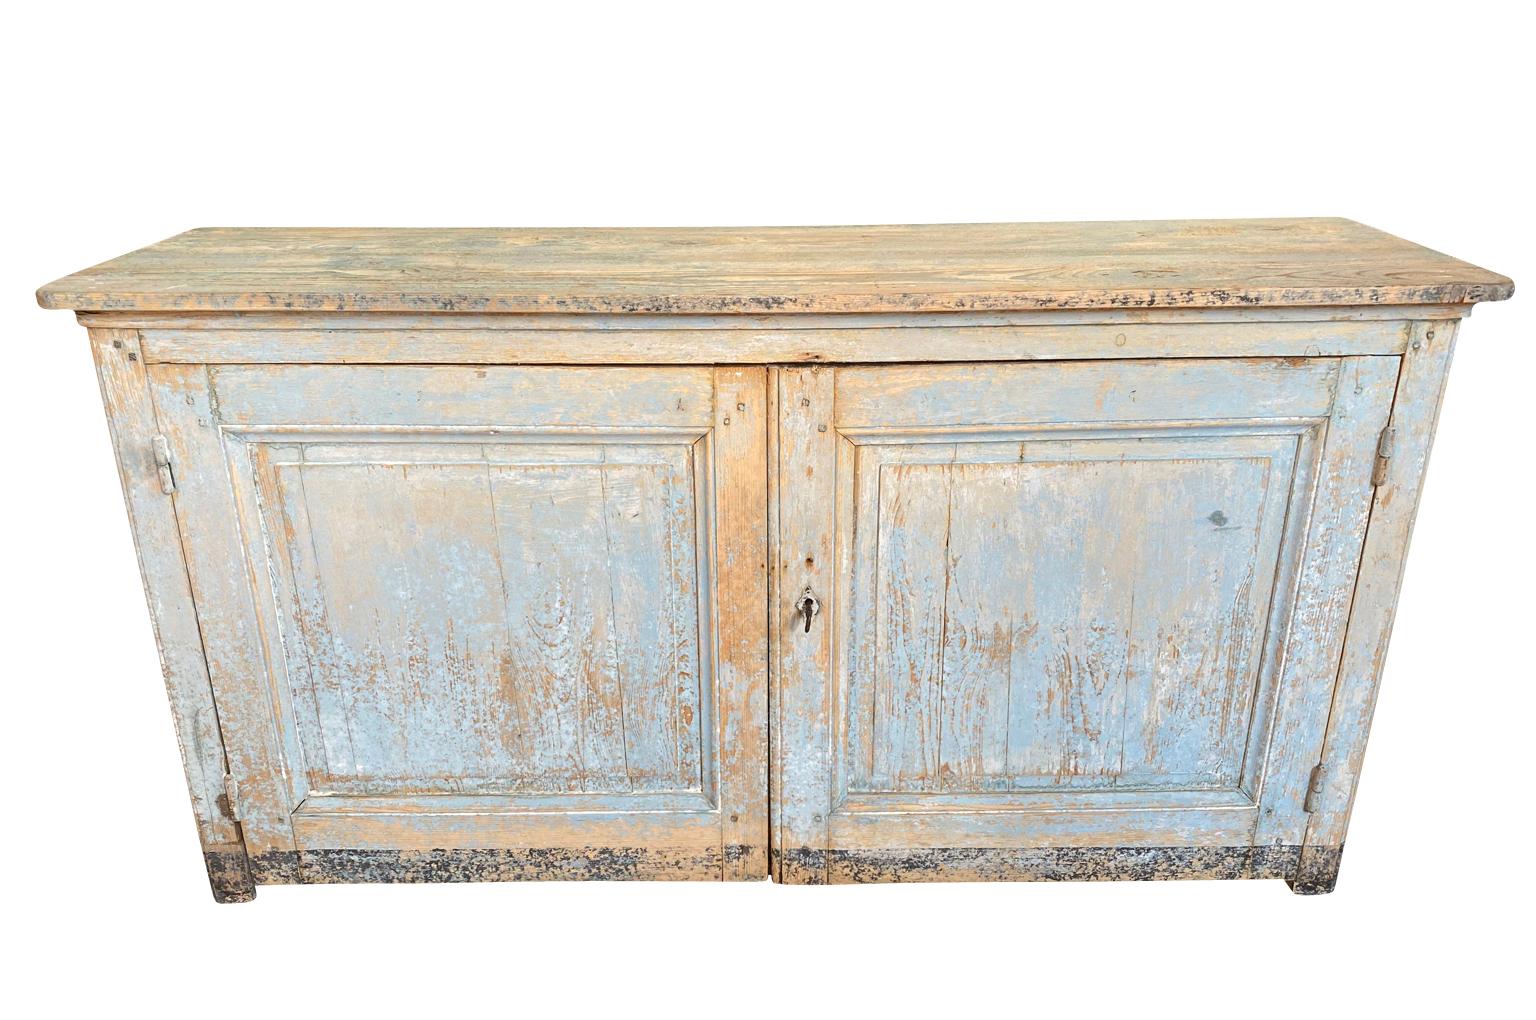 A very charming later mid-19th century 2 door buffet from the Provence region of France. Wonderfully constructed from painted wood - beautiful patina and finish.